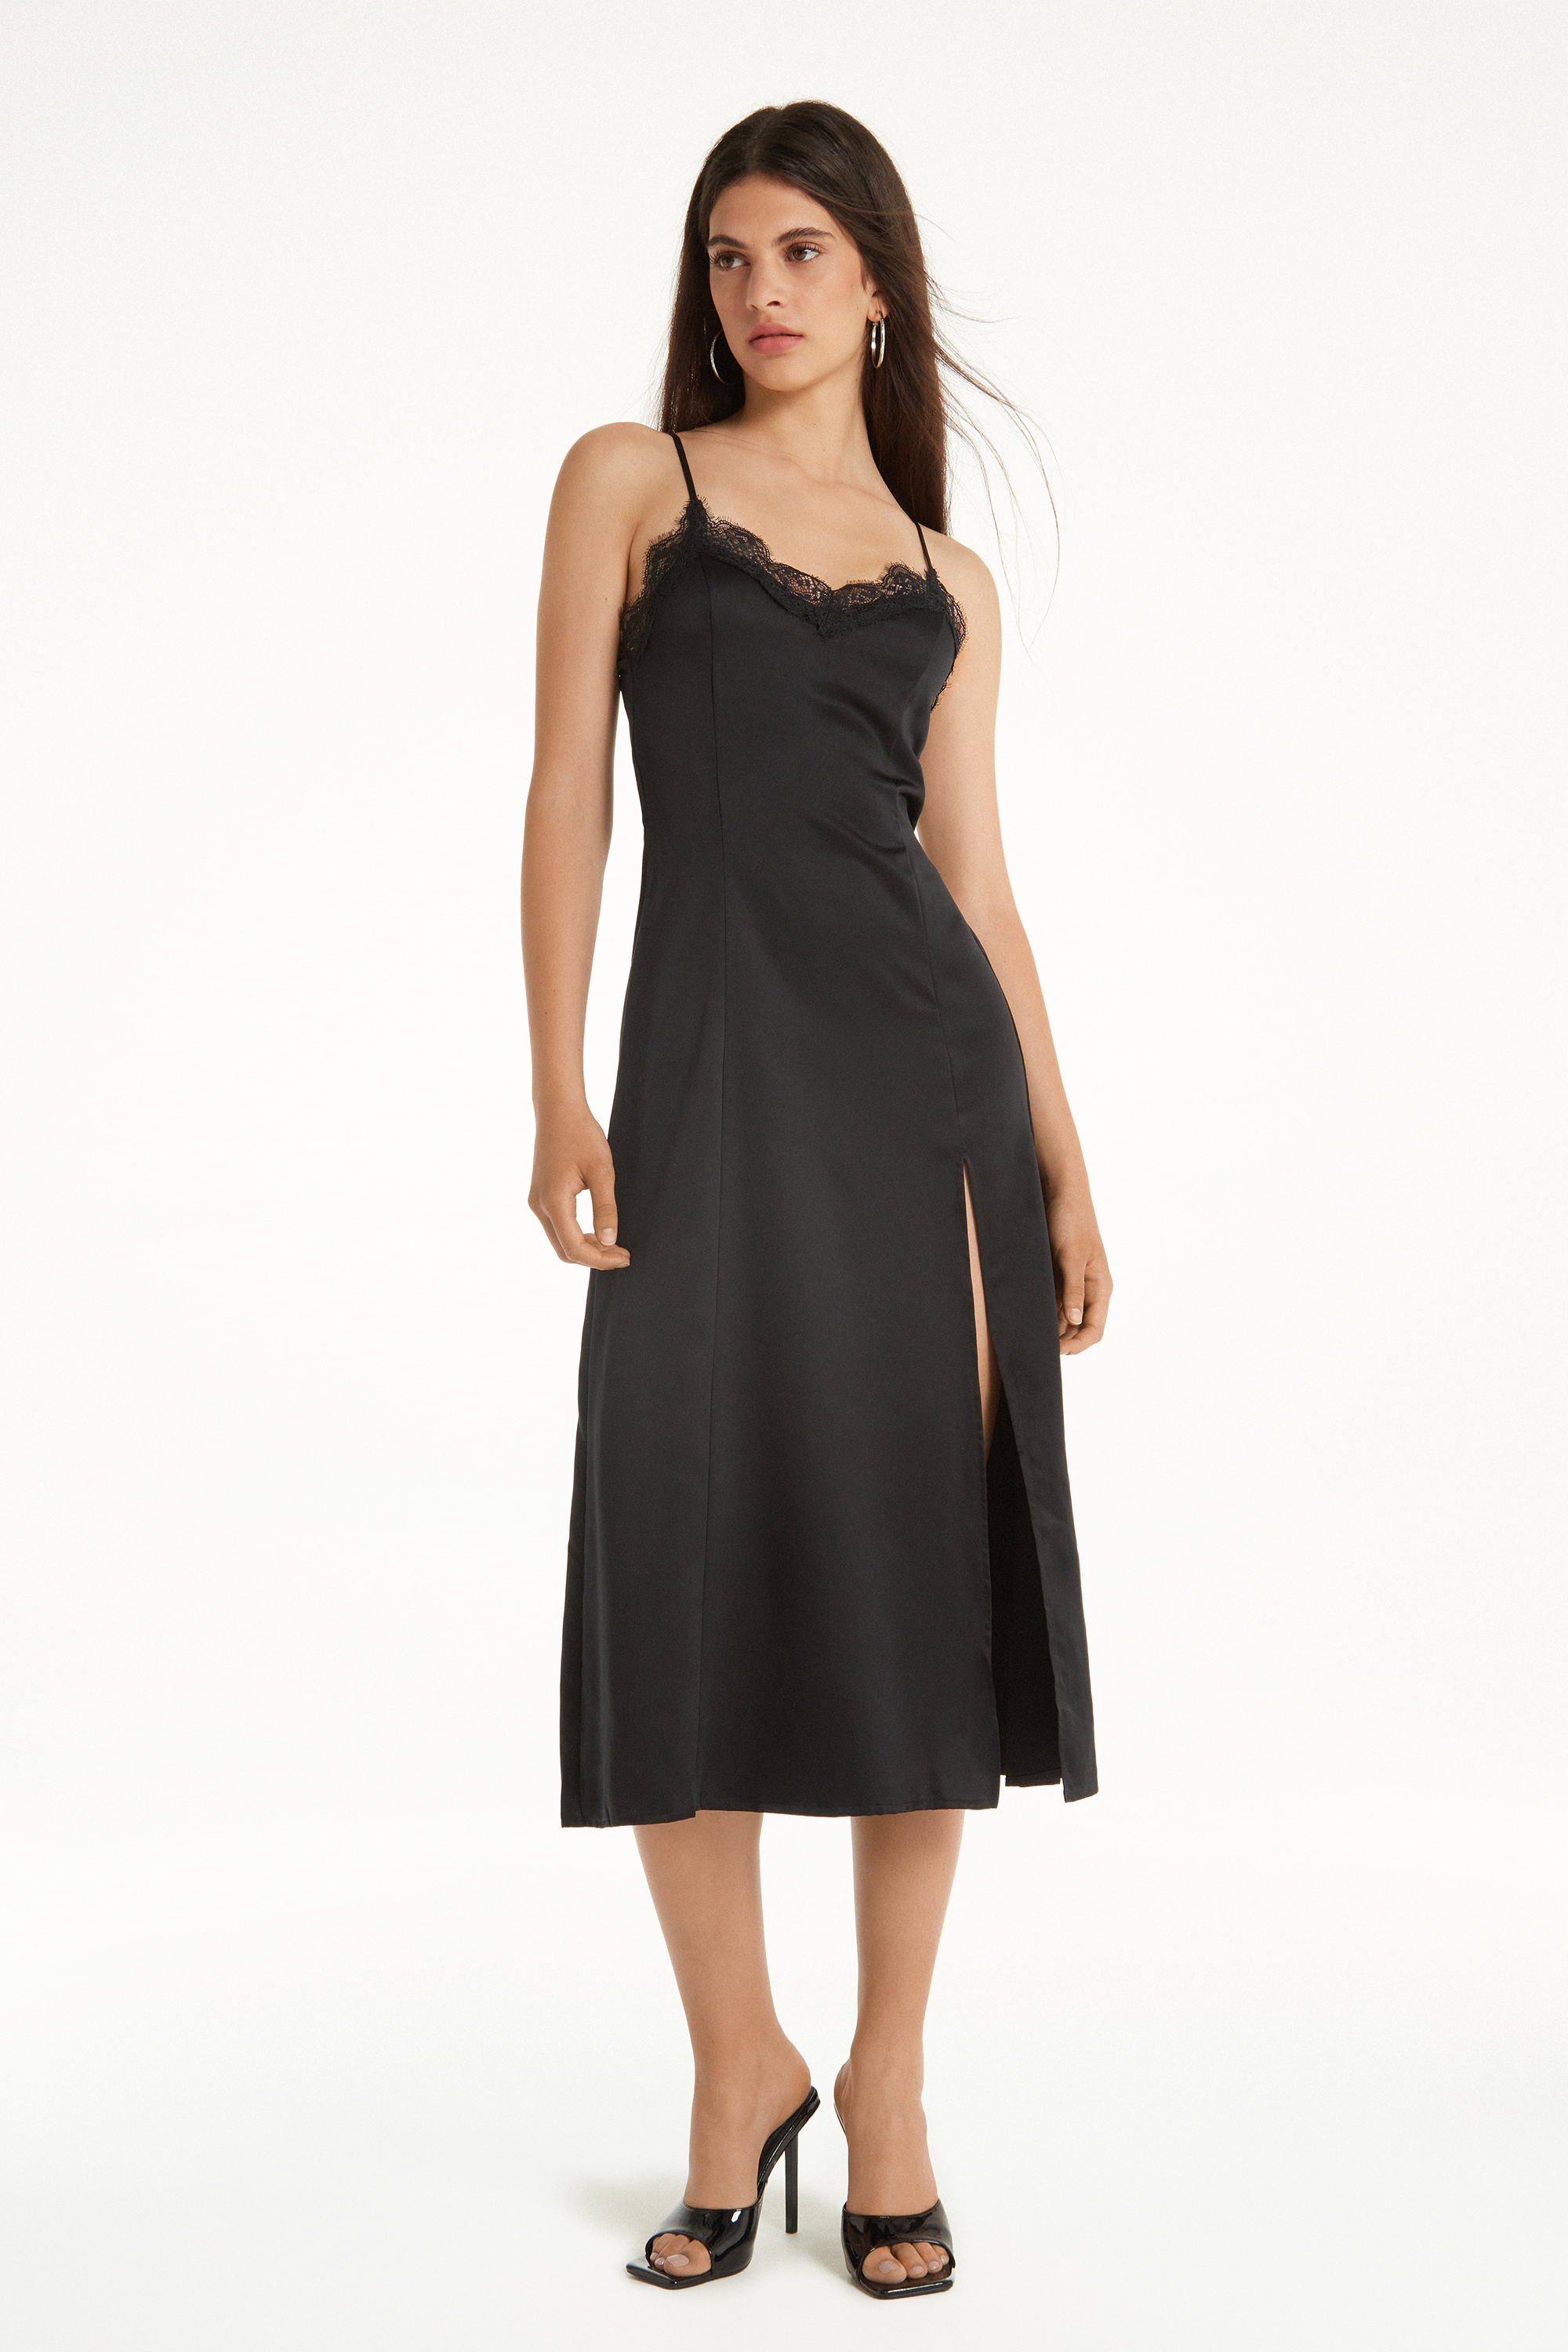 Satin and Lace Midi Dress with Thin Shoulder Straps